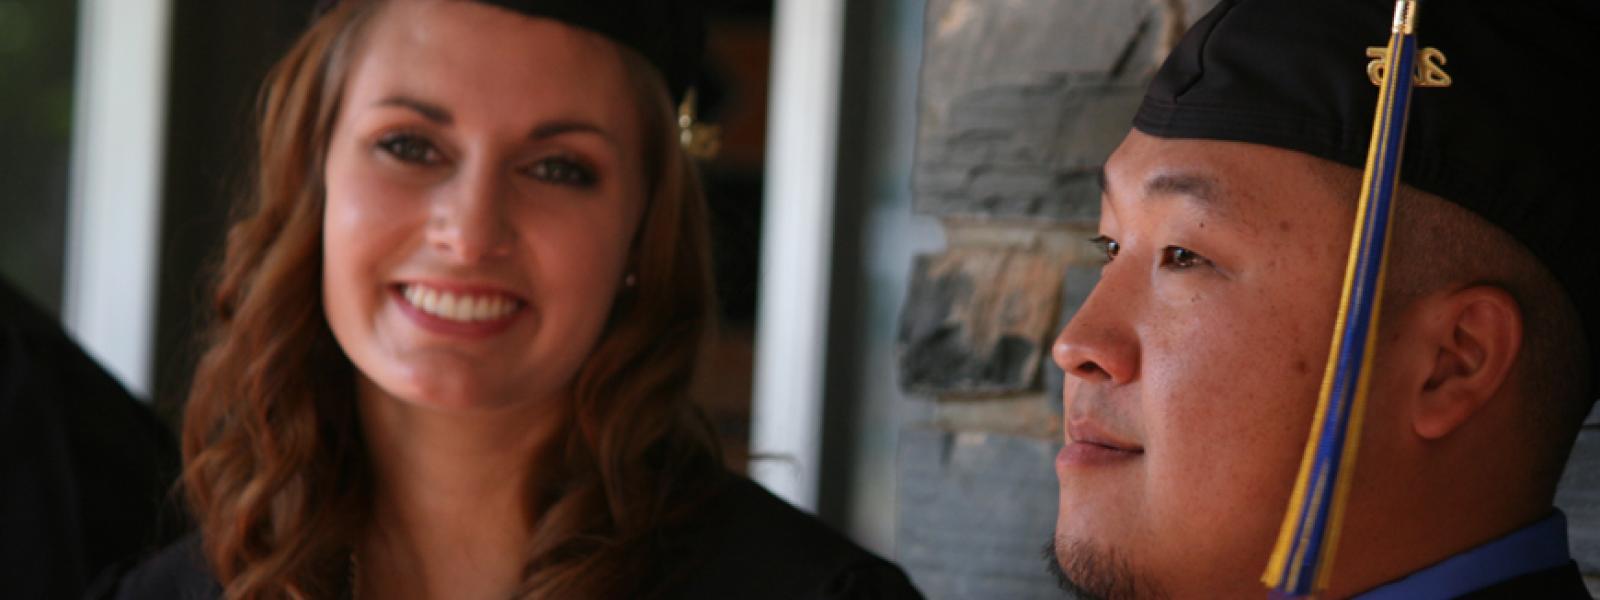 A photo of two 2015 CIU graduates. Donor scholarships allow students graduate with less debt.